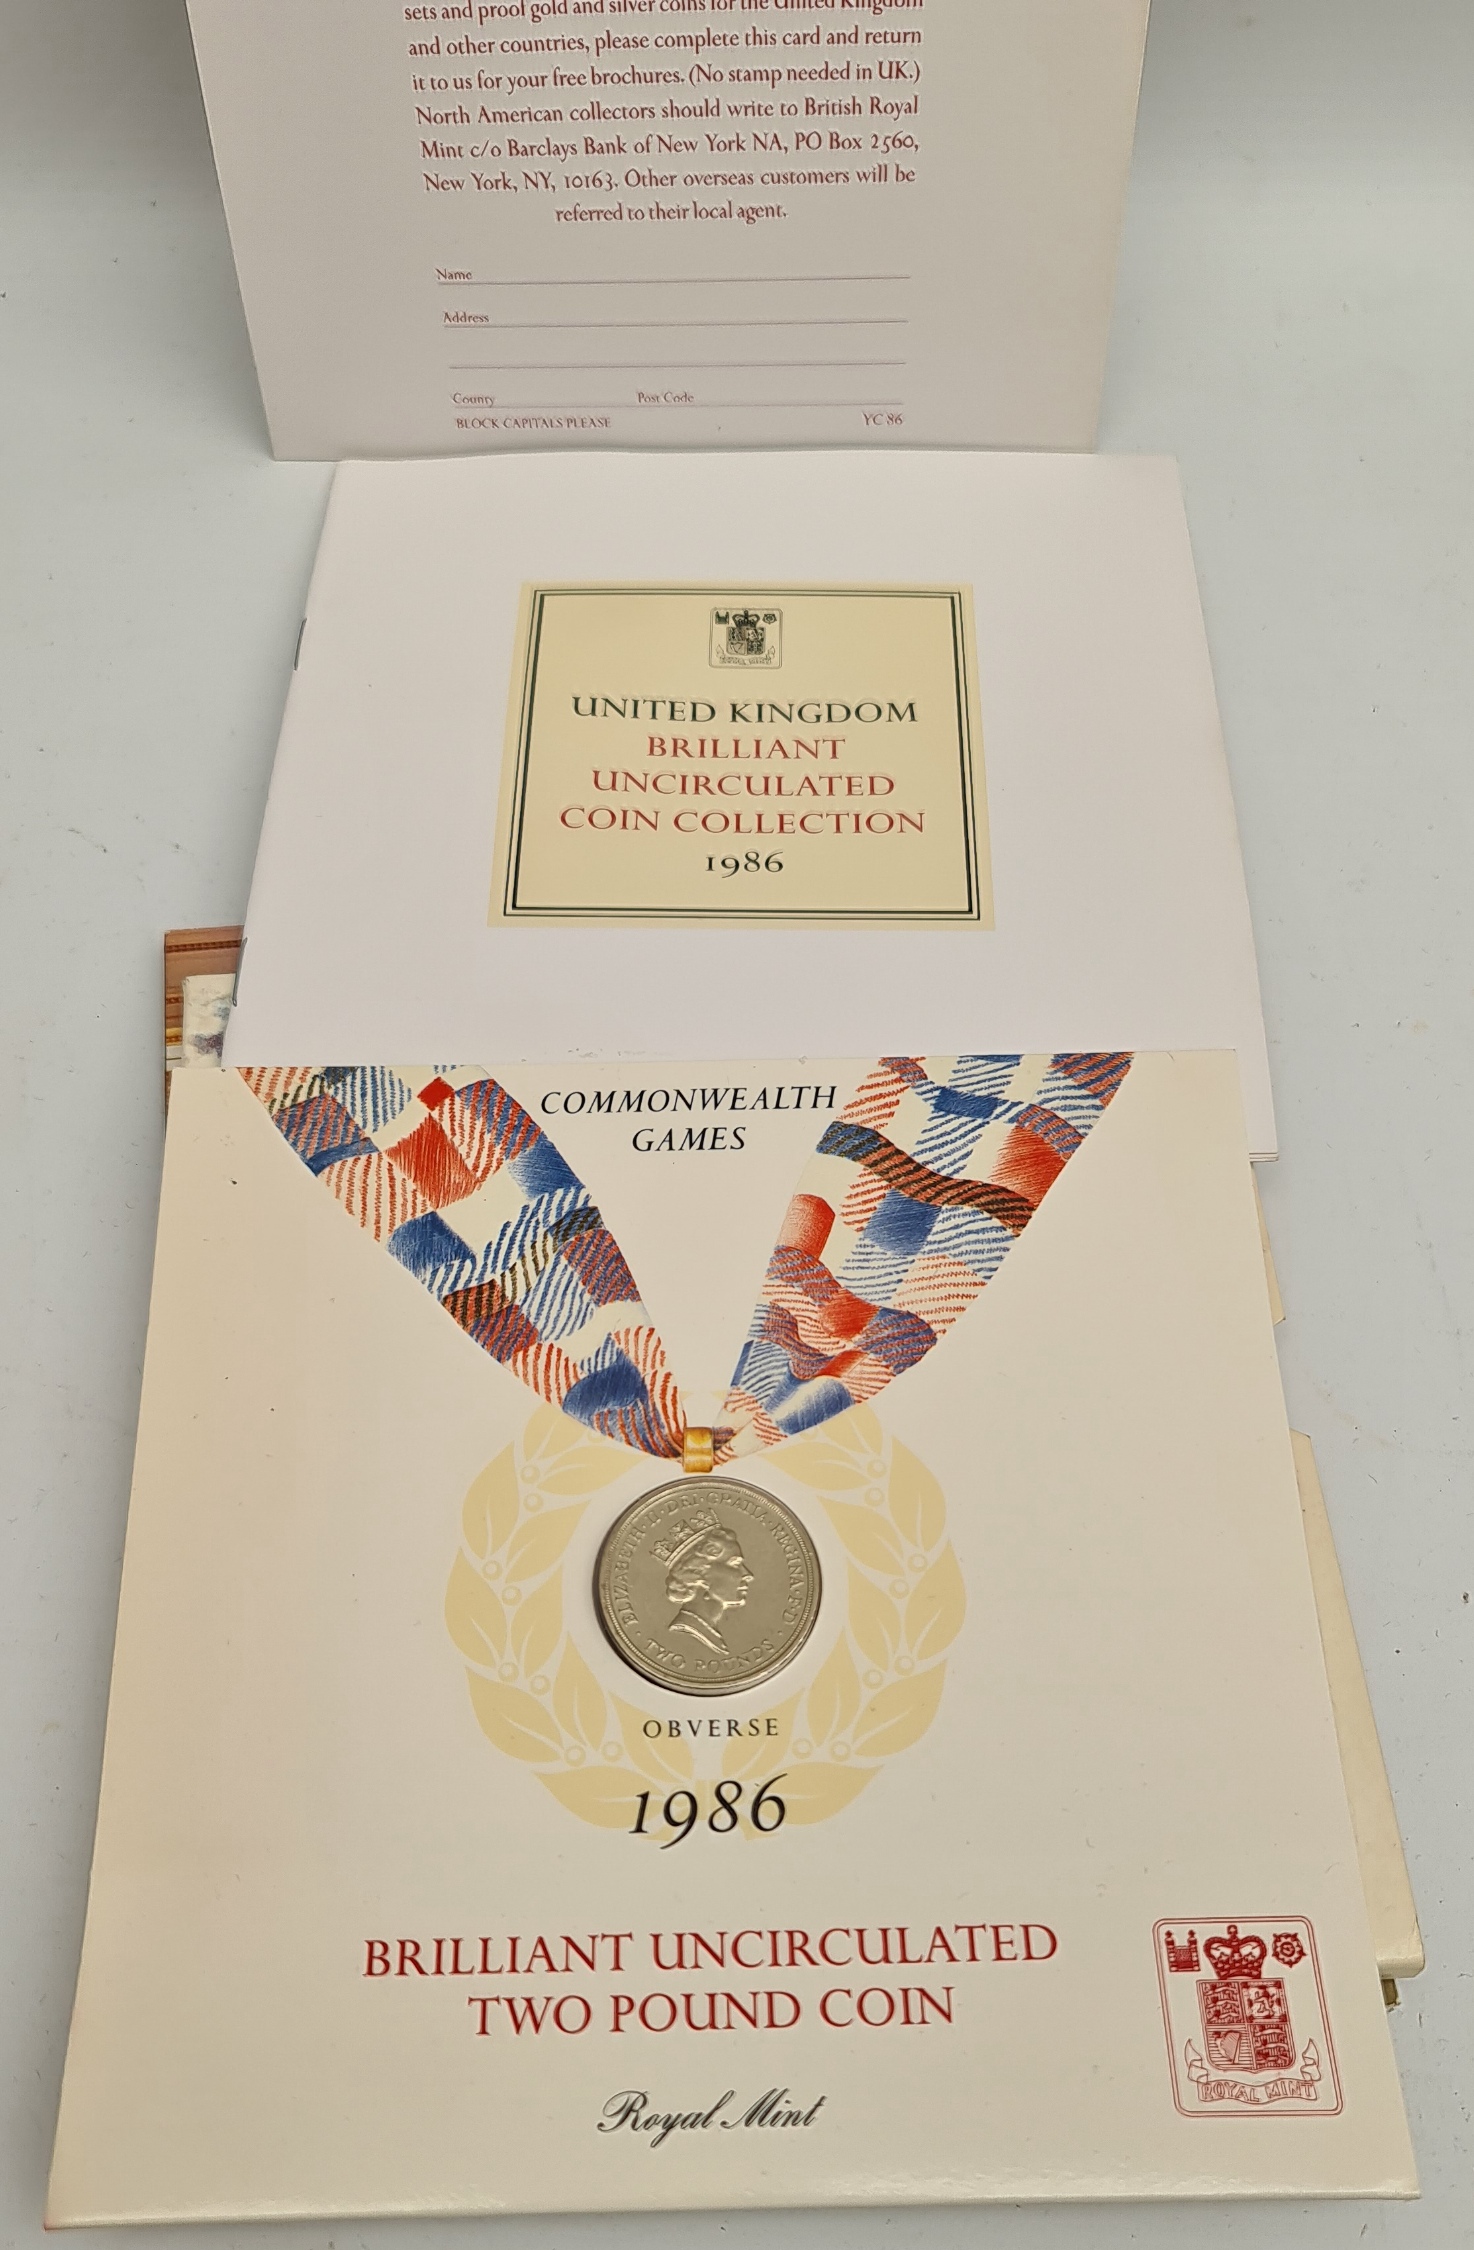 Coins 1986 Commonwealth Games & Buckingham Palace 2001 - Image 3 of 3